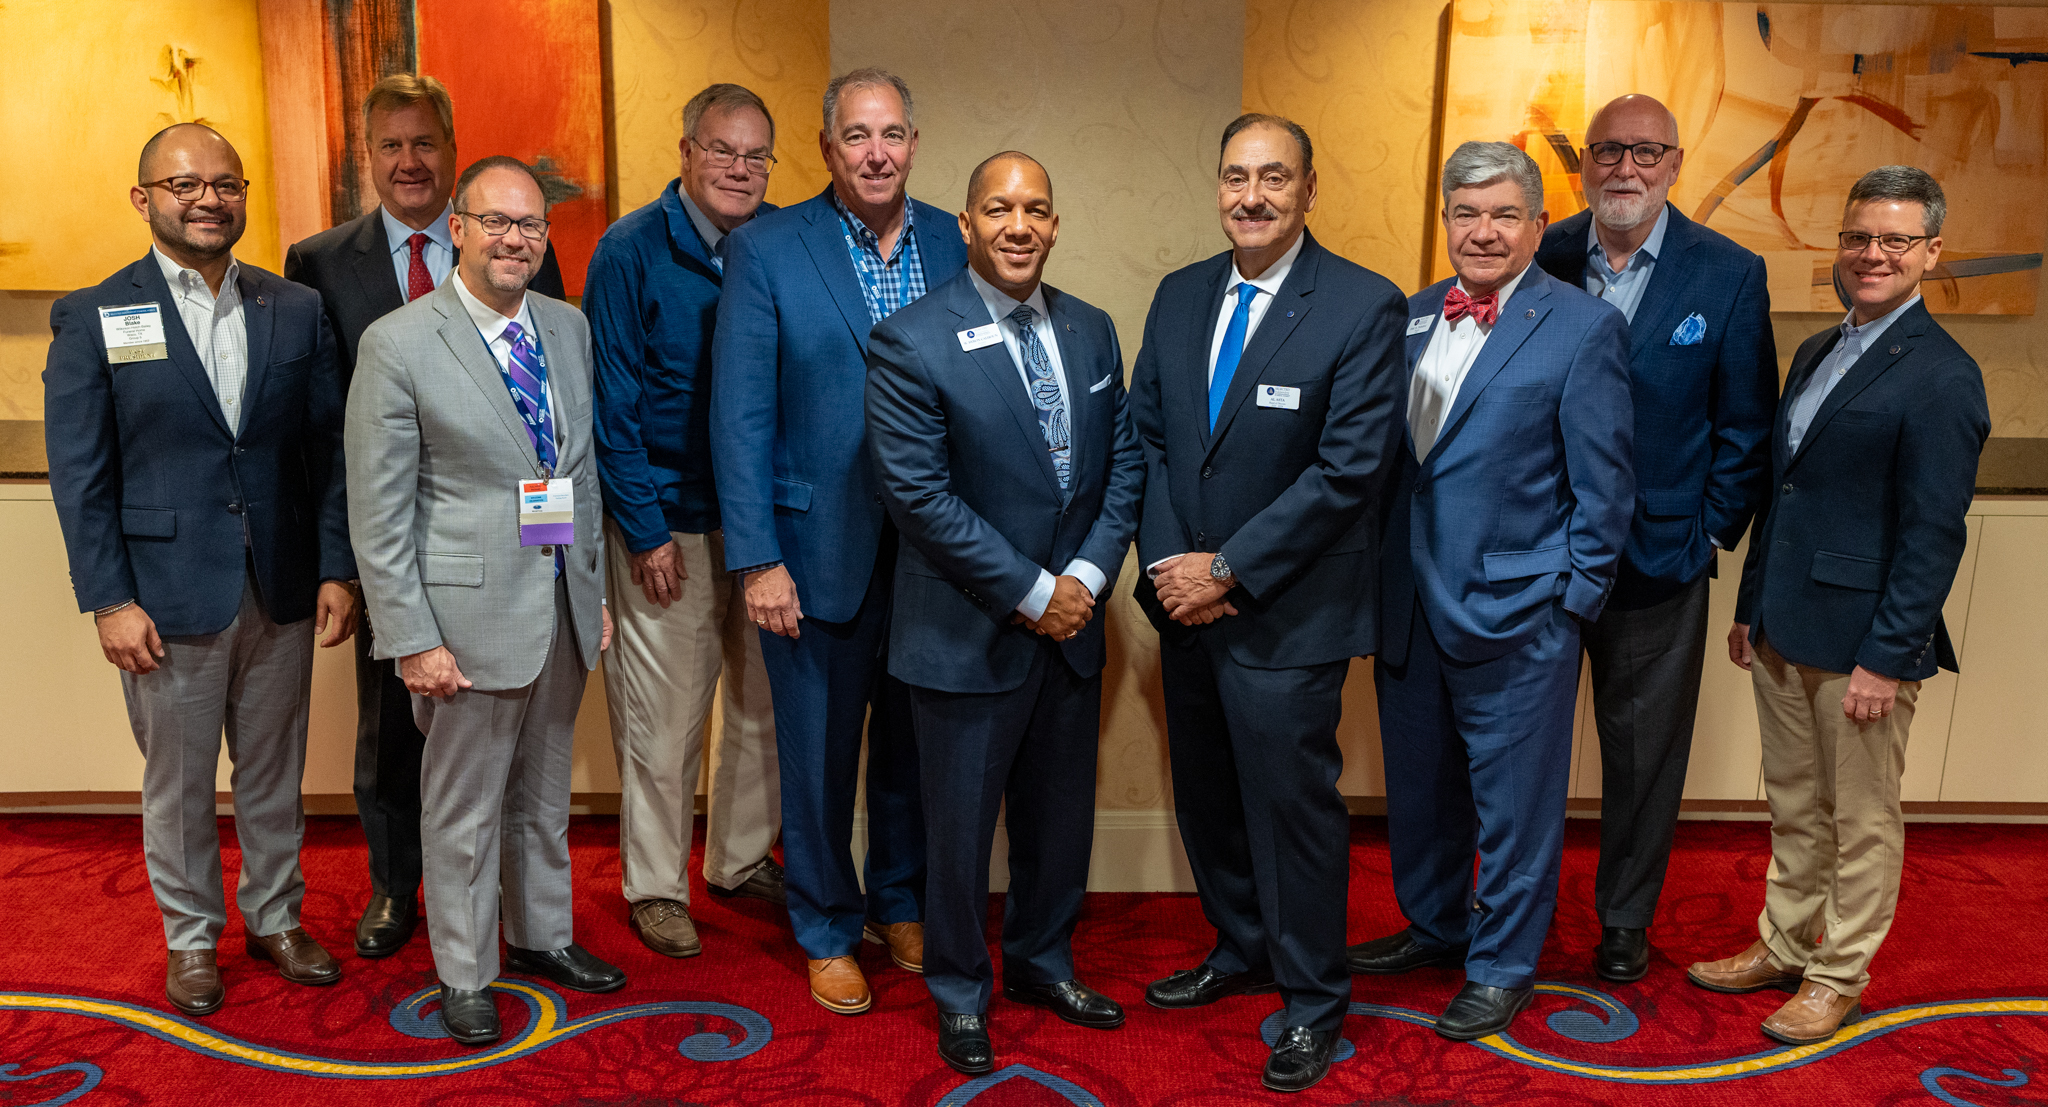 Selected Independent Funeral Homes Connects Leaders at the 2023 Annual Meeting in Chicago